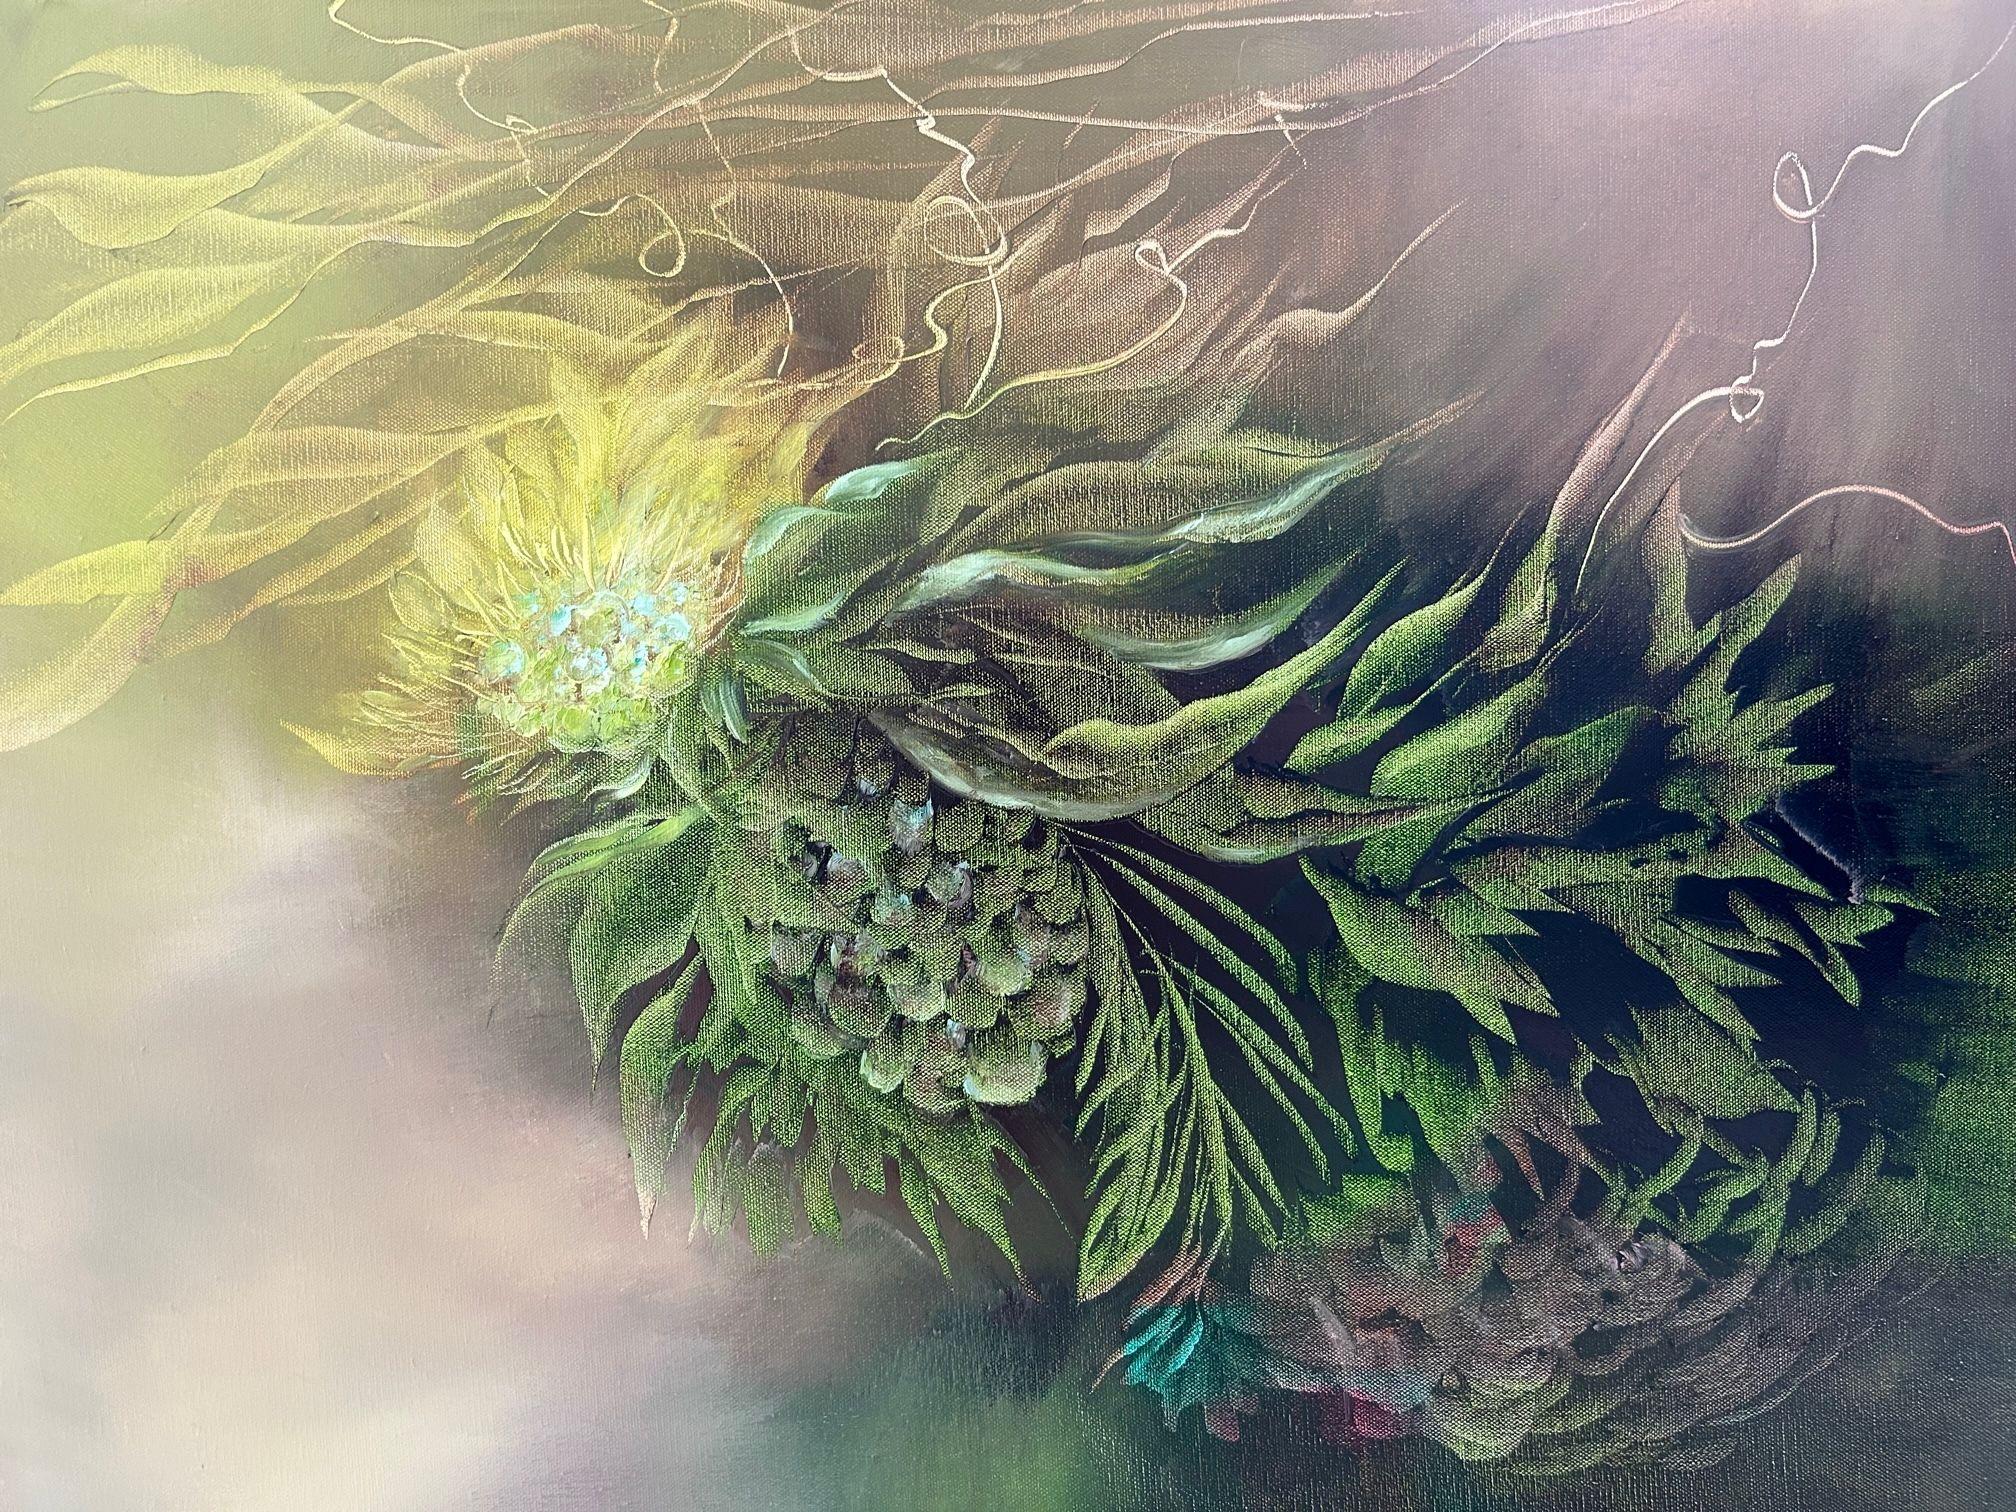 Another artwork from the series "Night fragrance". The artist uses a new color palette for her, but her unique style is the same.  Fantastic plants sway in the night garden, exuding a unique aroma. It seems that we can smell this fragrance and feel